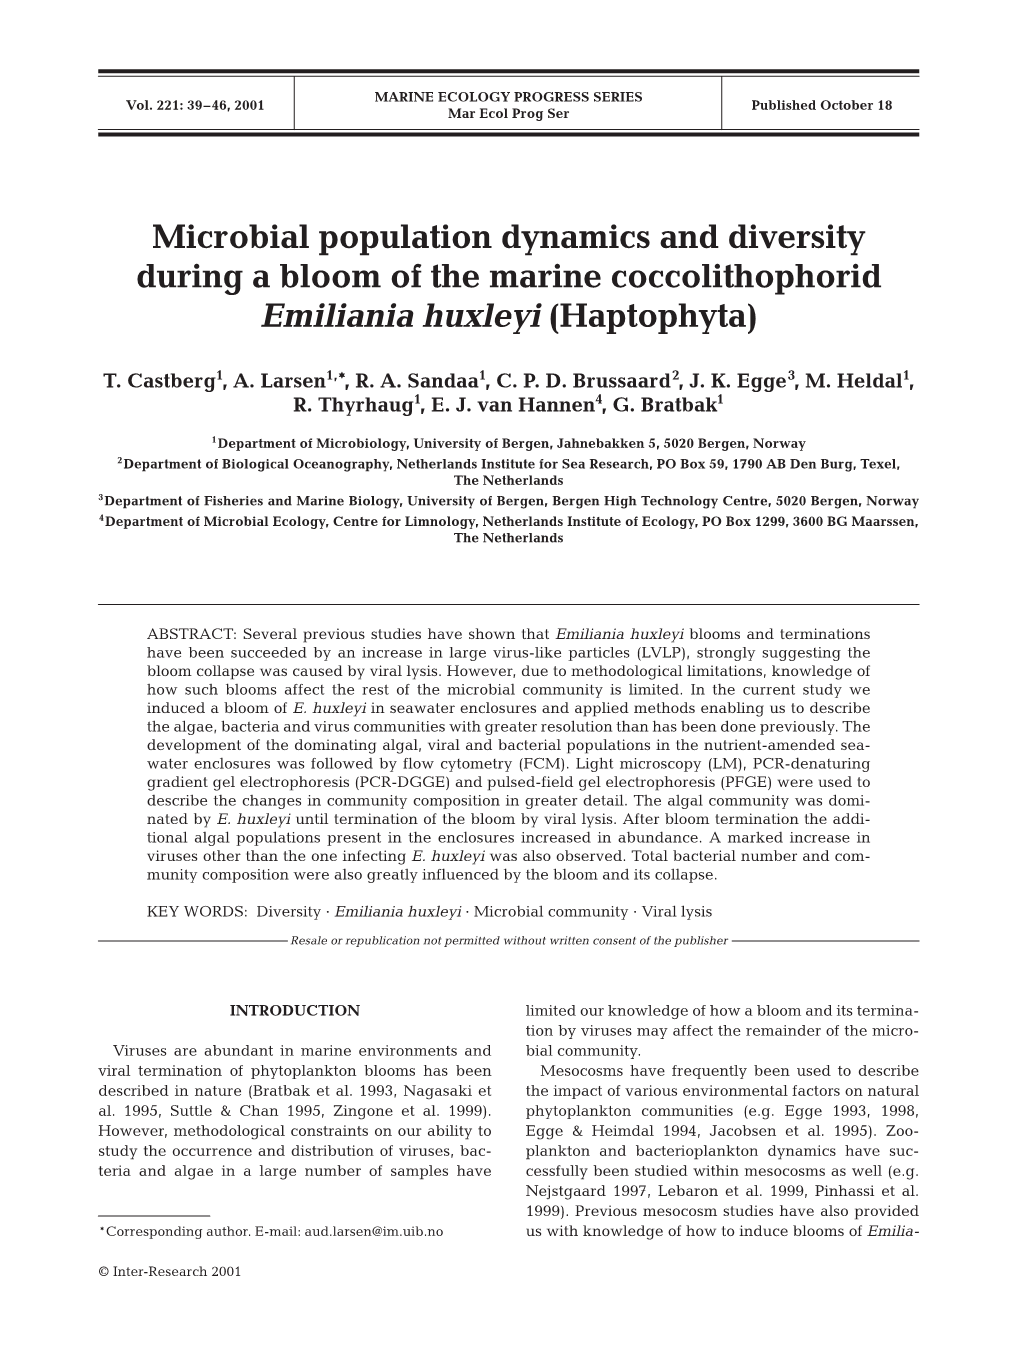 Microbial Population Dynamics and Diversity During a Bloom of the Marine Coccolithophorid Emiliania Huxleyi (Haptophyta)